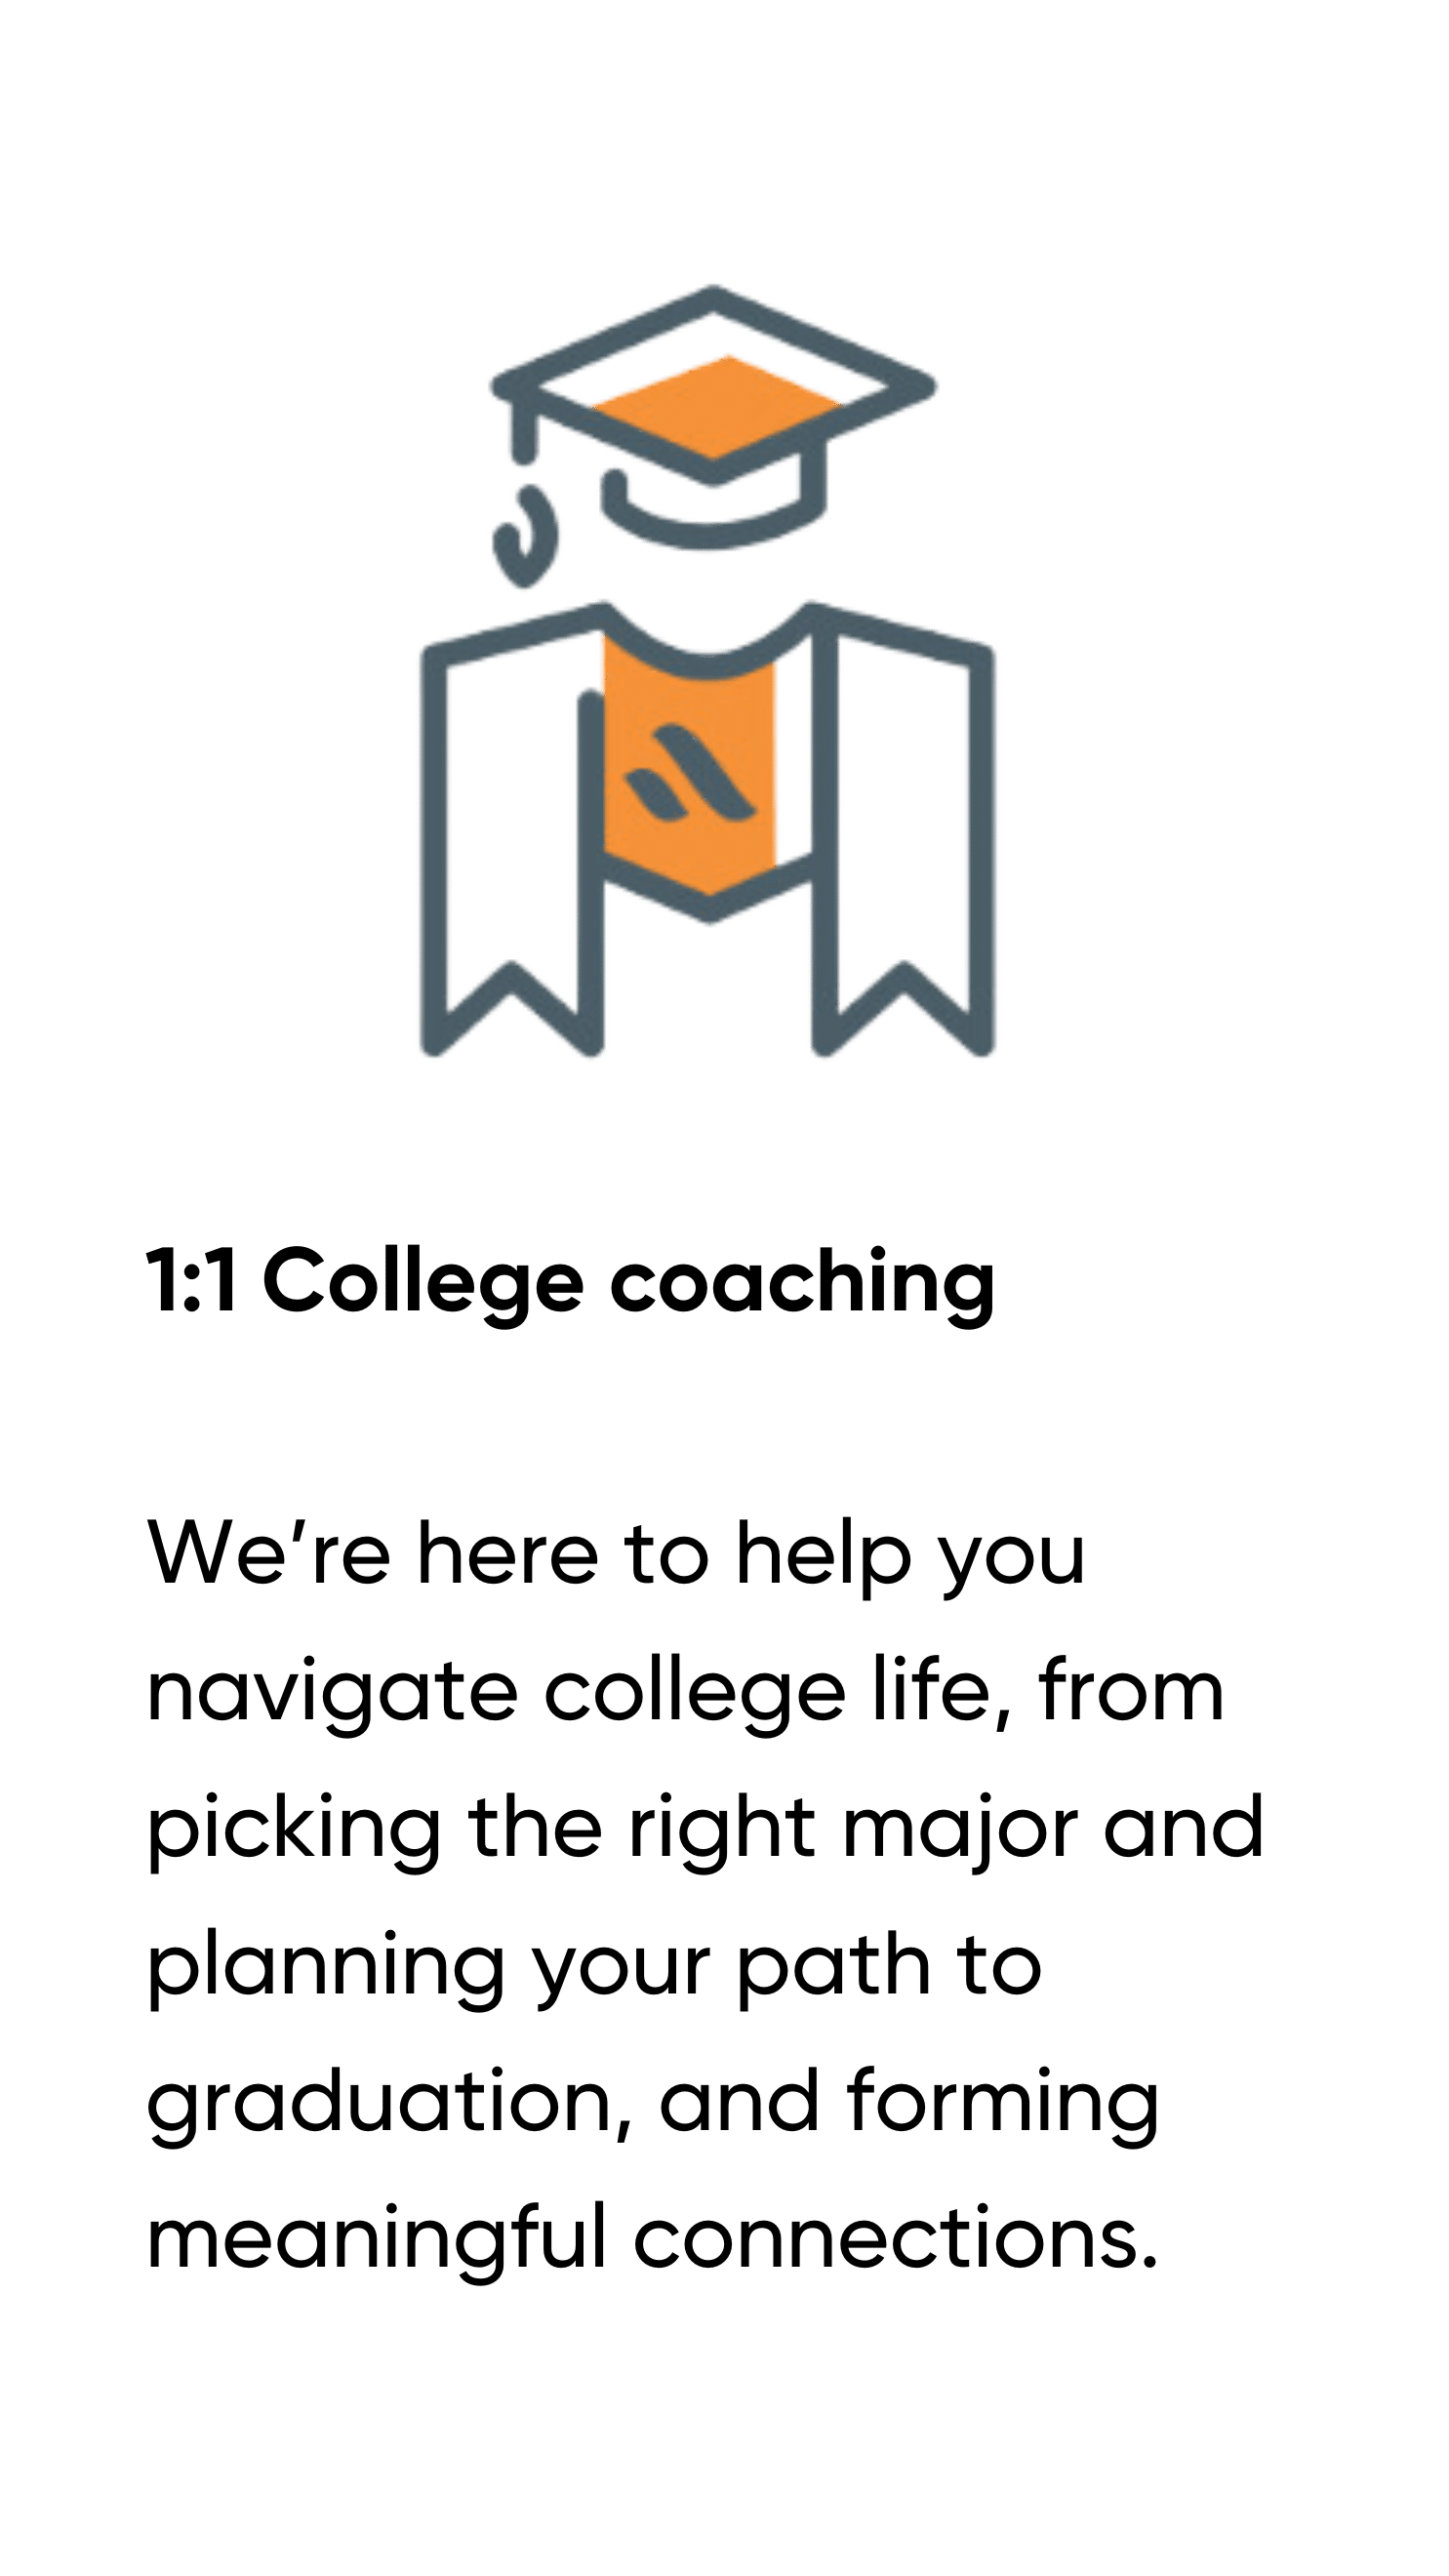 an orange and gray college graduate icon. underneath text appears: 1:! college coaching. We're here to help you navigate college life, from picking the right major and planning your path to graduation and forming meaningful connections.